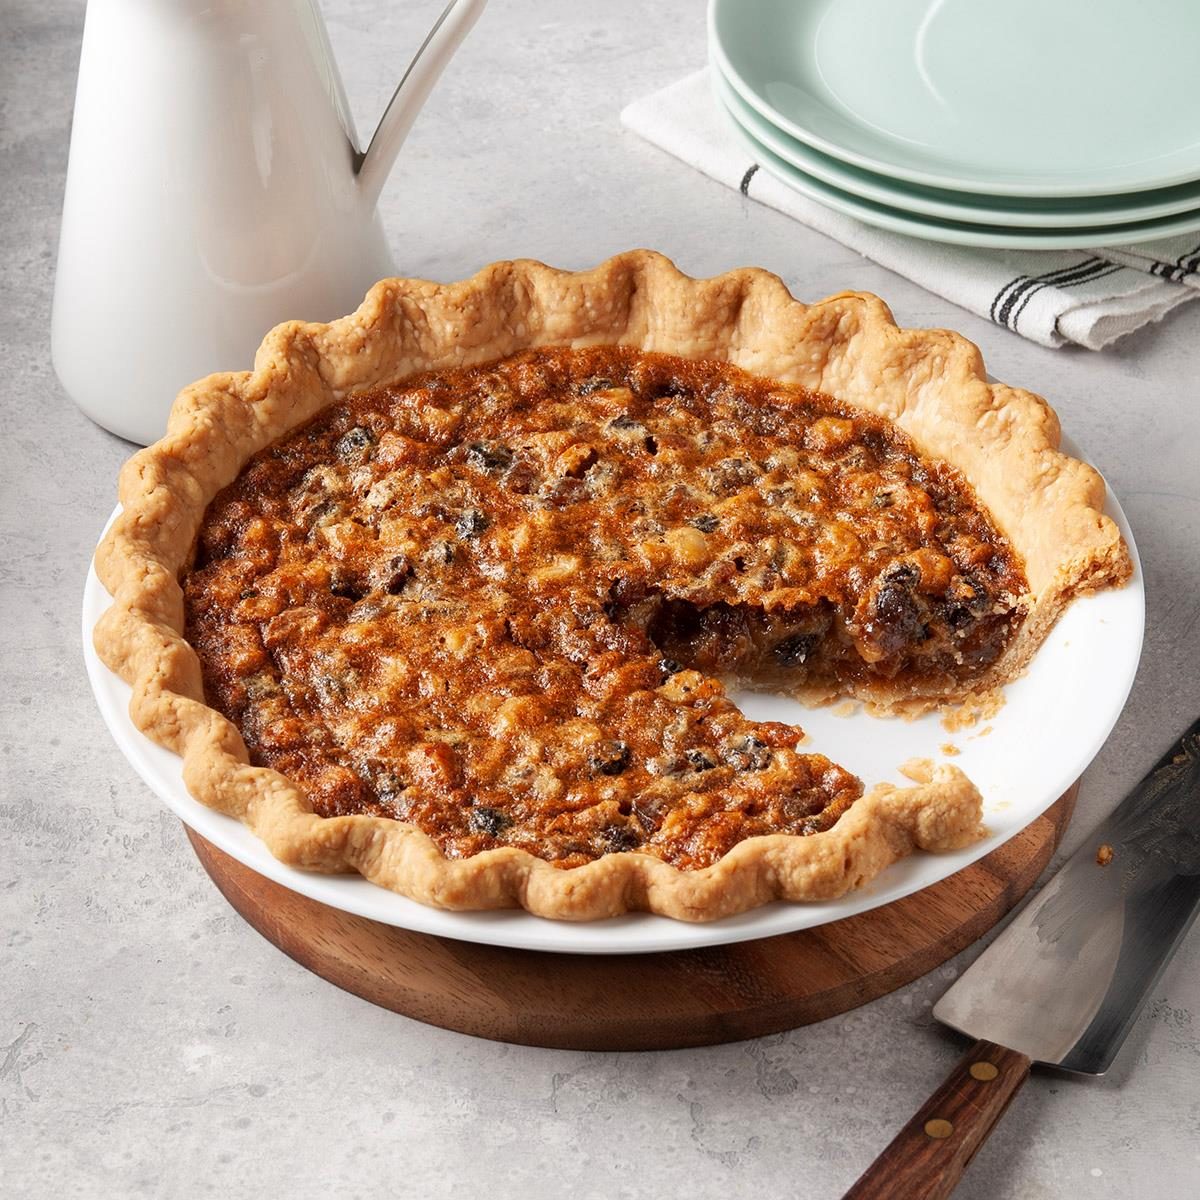 Old-Fashioned Mincemeat Pie Recipe from 1798 - Our Heritage of Health